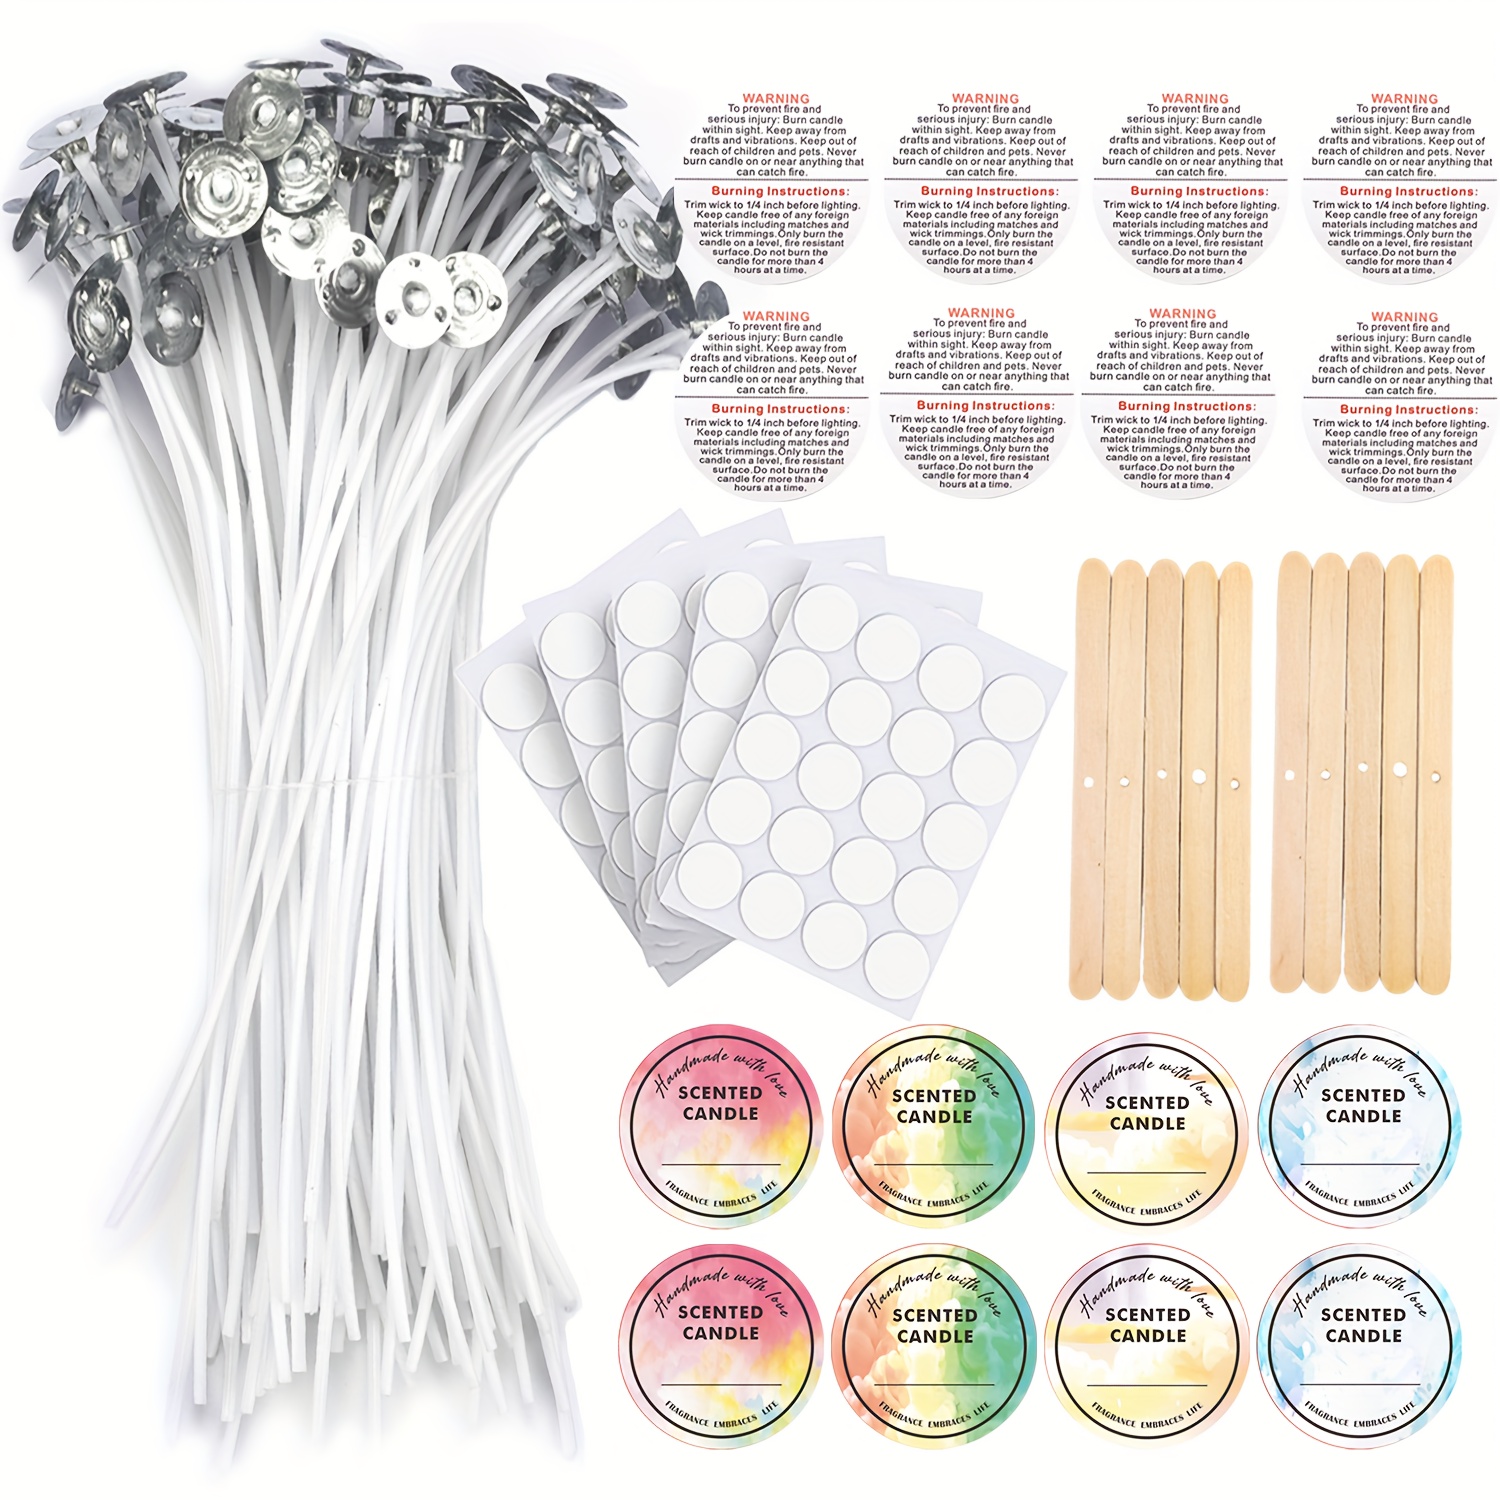 Candle Wicks 100 Pcs 6 inch with 30Pcs Candle Wick Stickers and 10